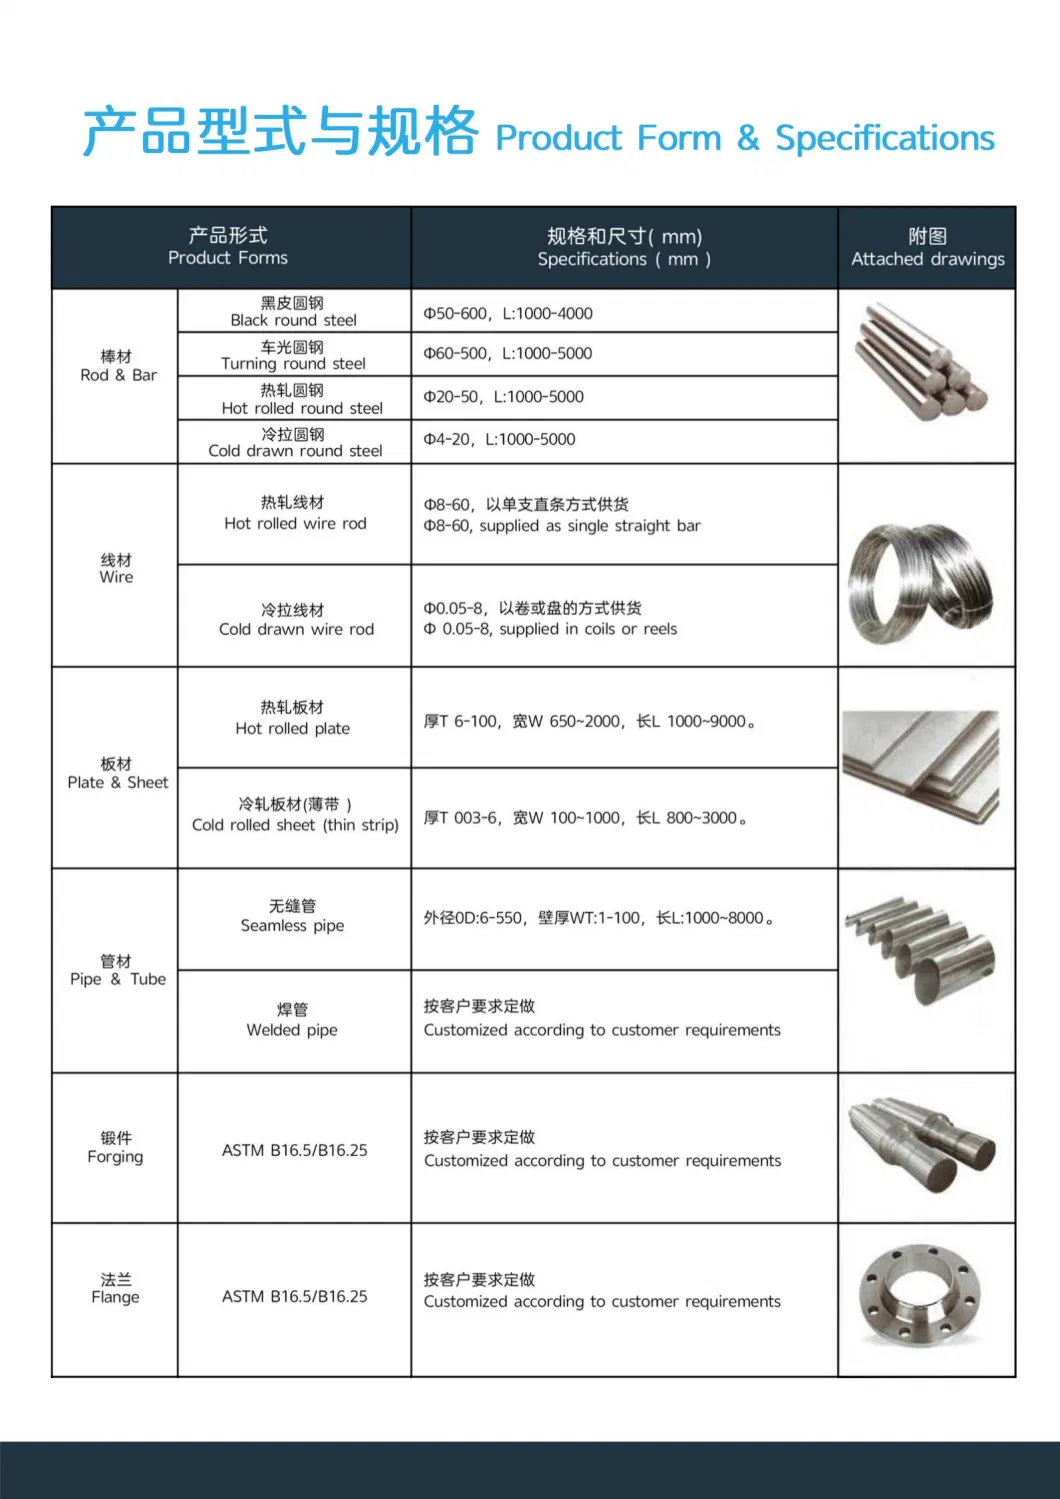 Gh738 / Gh4738 / Waspaloy (USA) / Nc20K14 (France) / Nickel-Based Superalloy